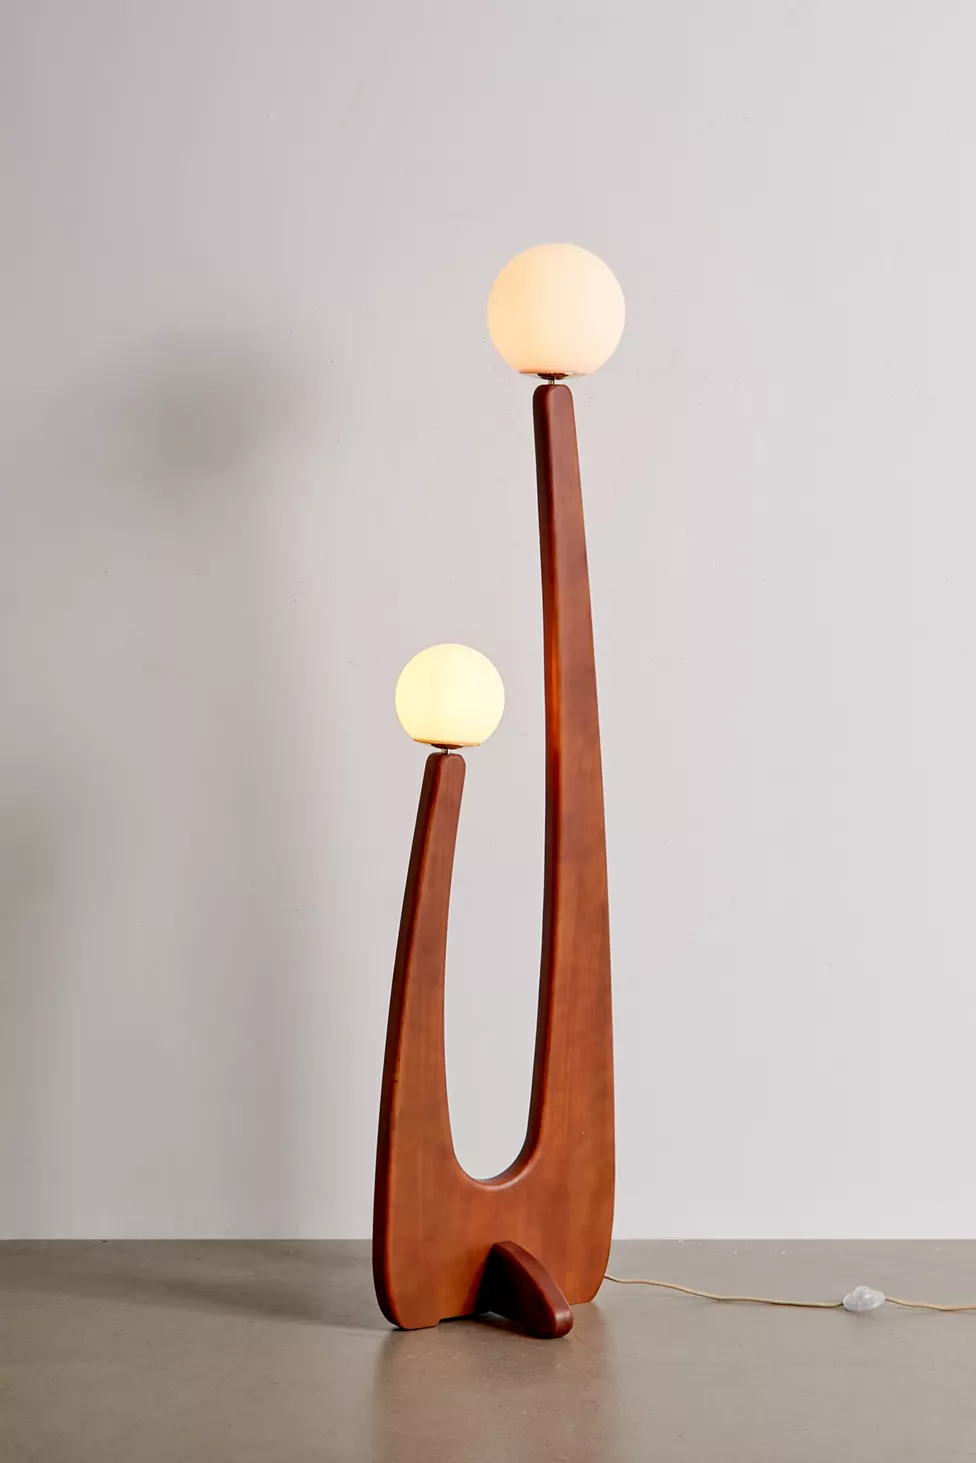 Funky Floor Lamps “Unique and Stylish Lighting Options for Your Home Decor”